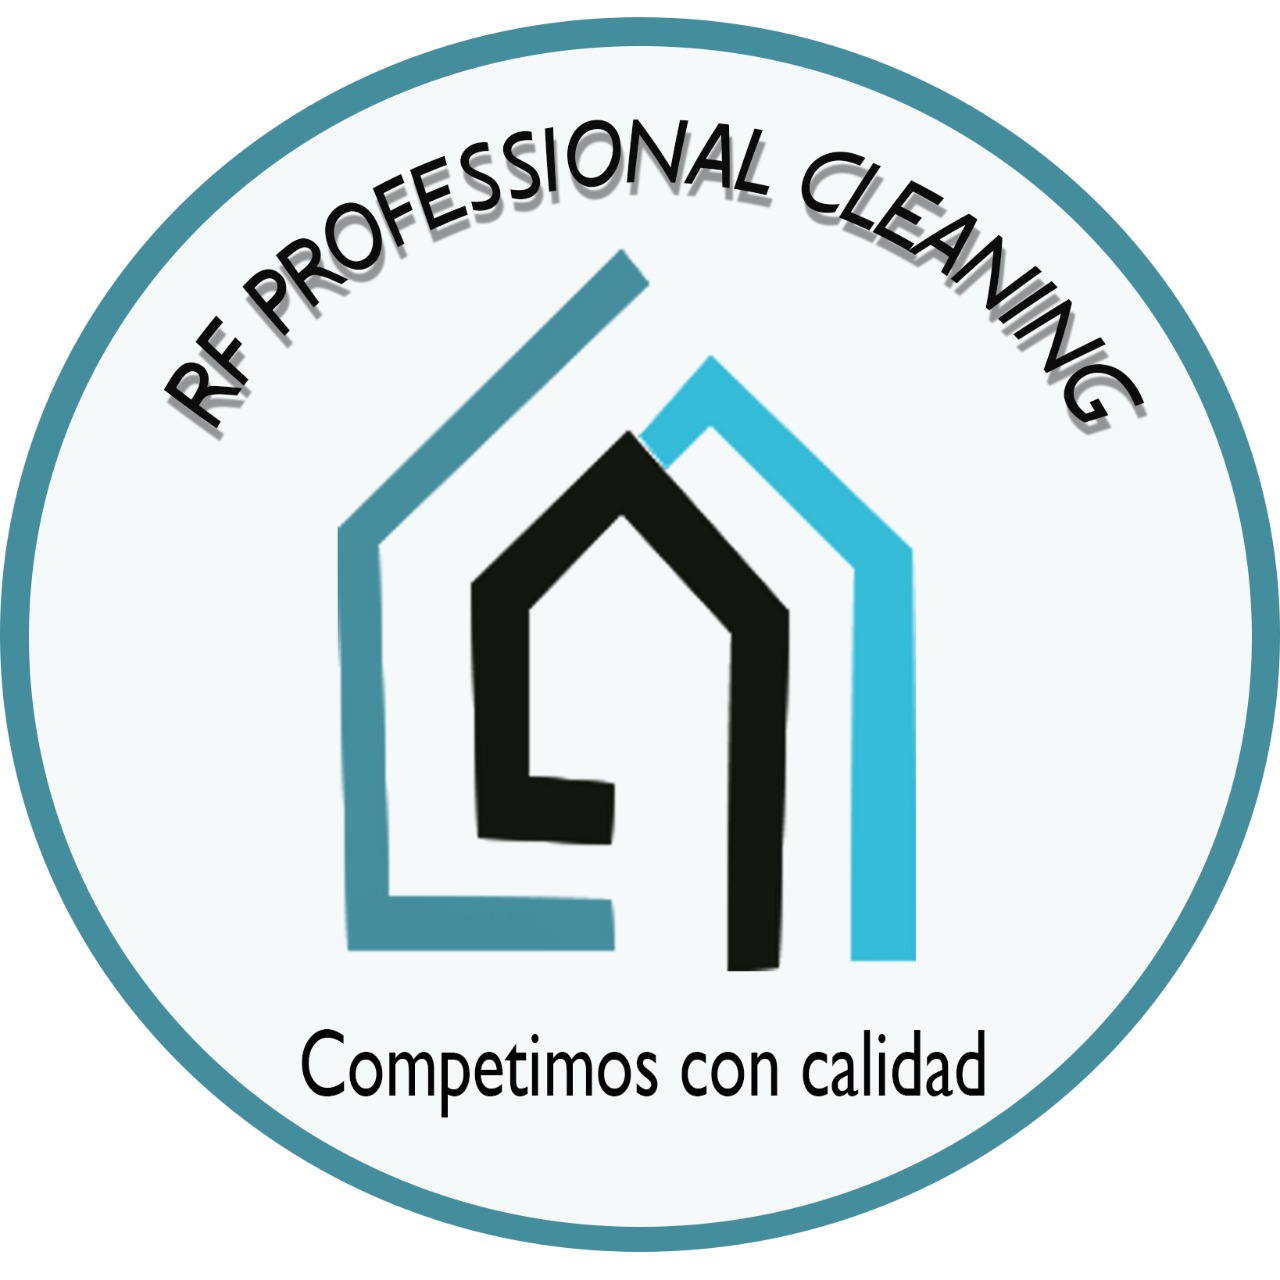 RS PROFESSIONAL CLEANING Xirivella